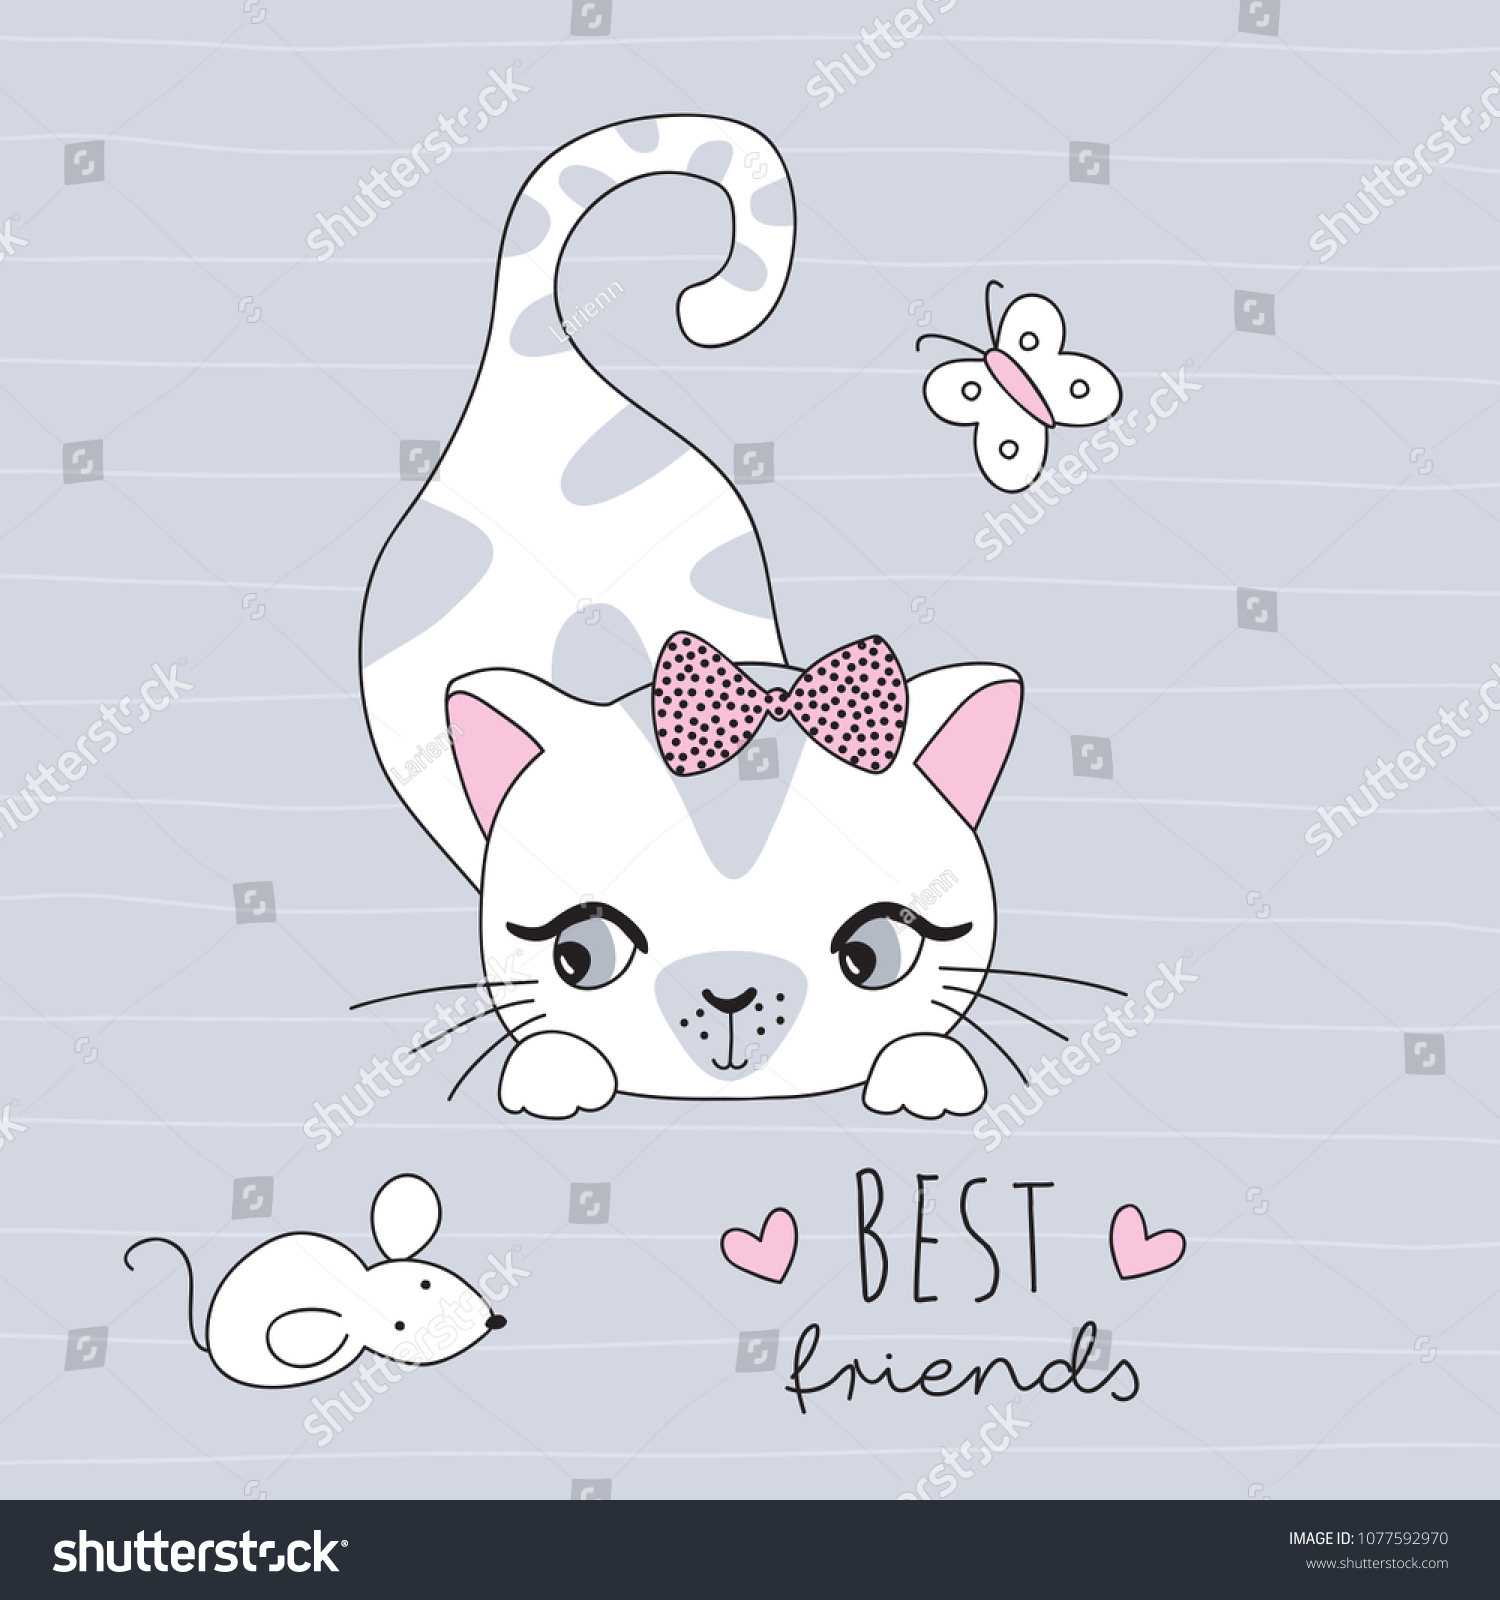 Cute Cat Mouse Best Friends Vector Stock Vector Royalty Free